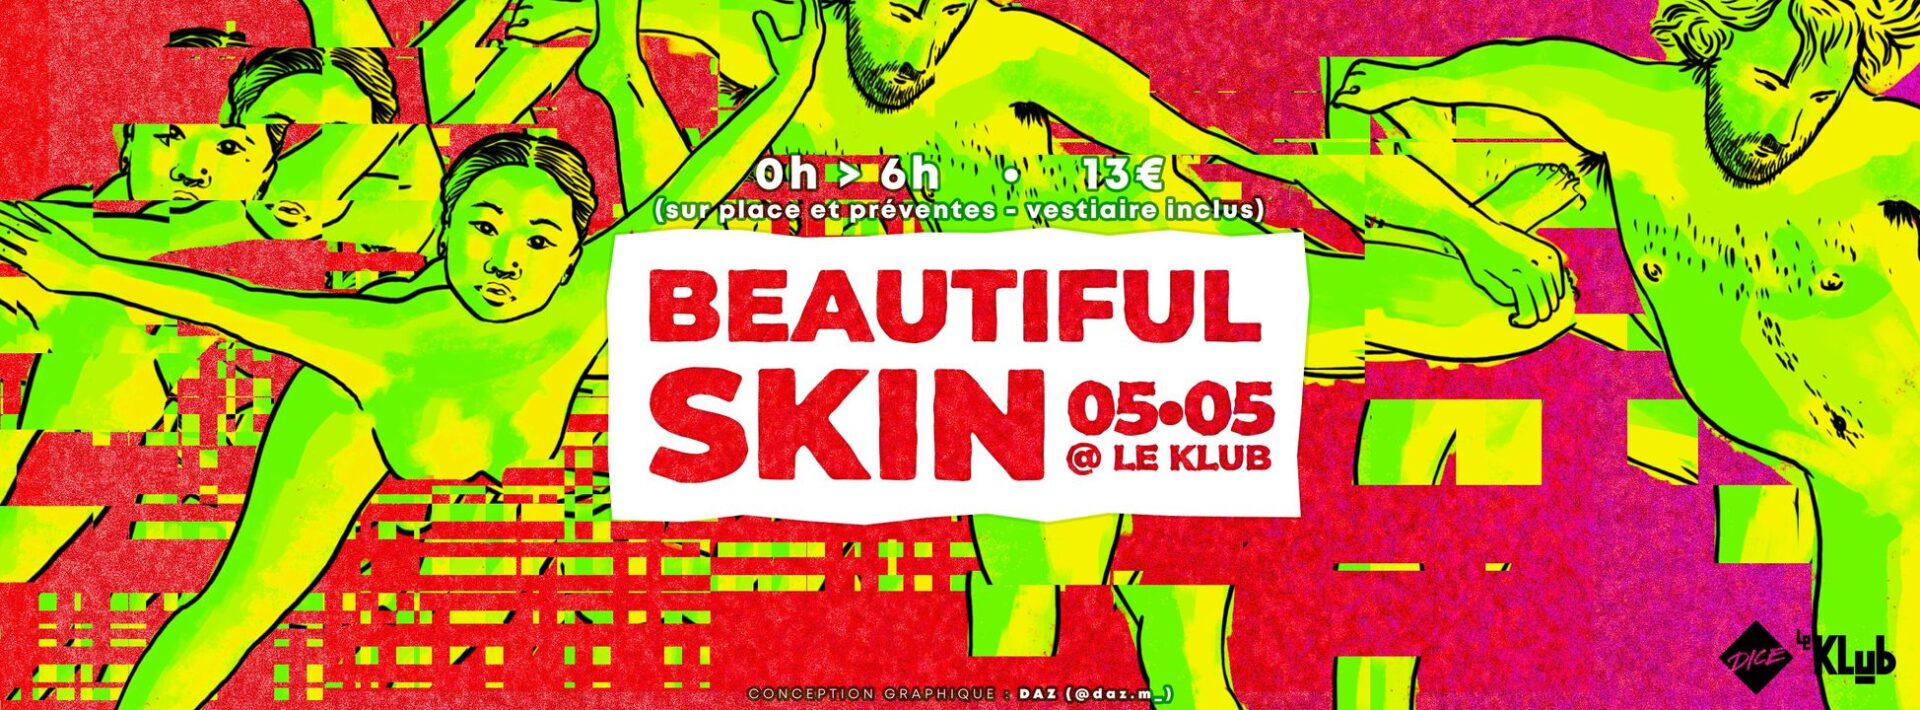 Win tickets to see Beautiful Skin - Clubbing Naturiste - Le Klub!